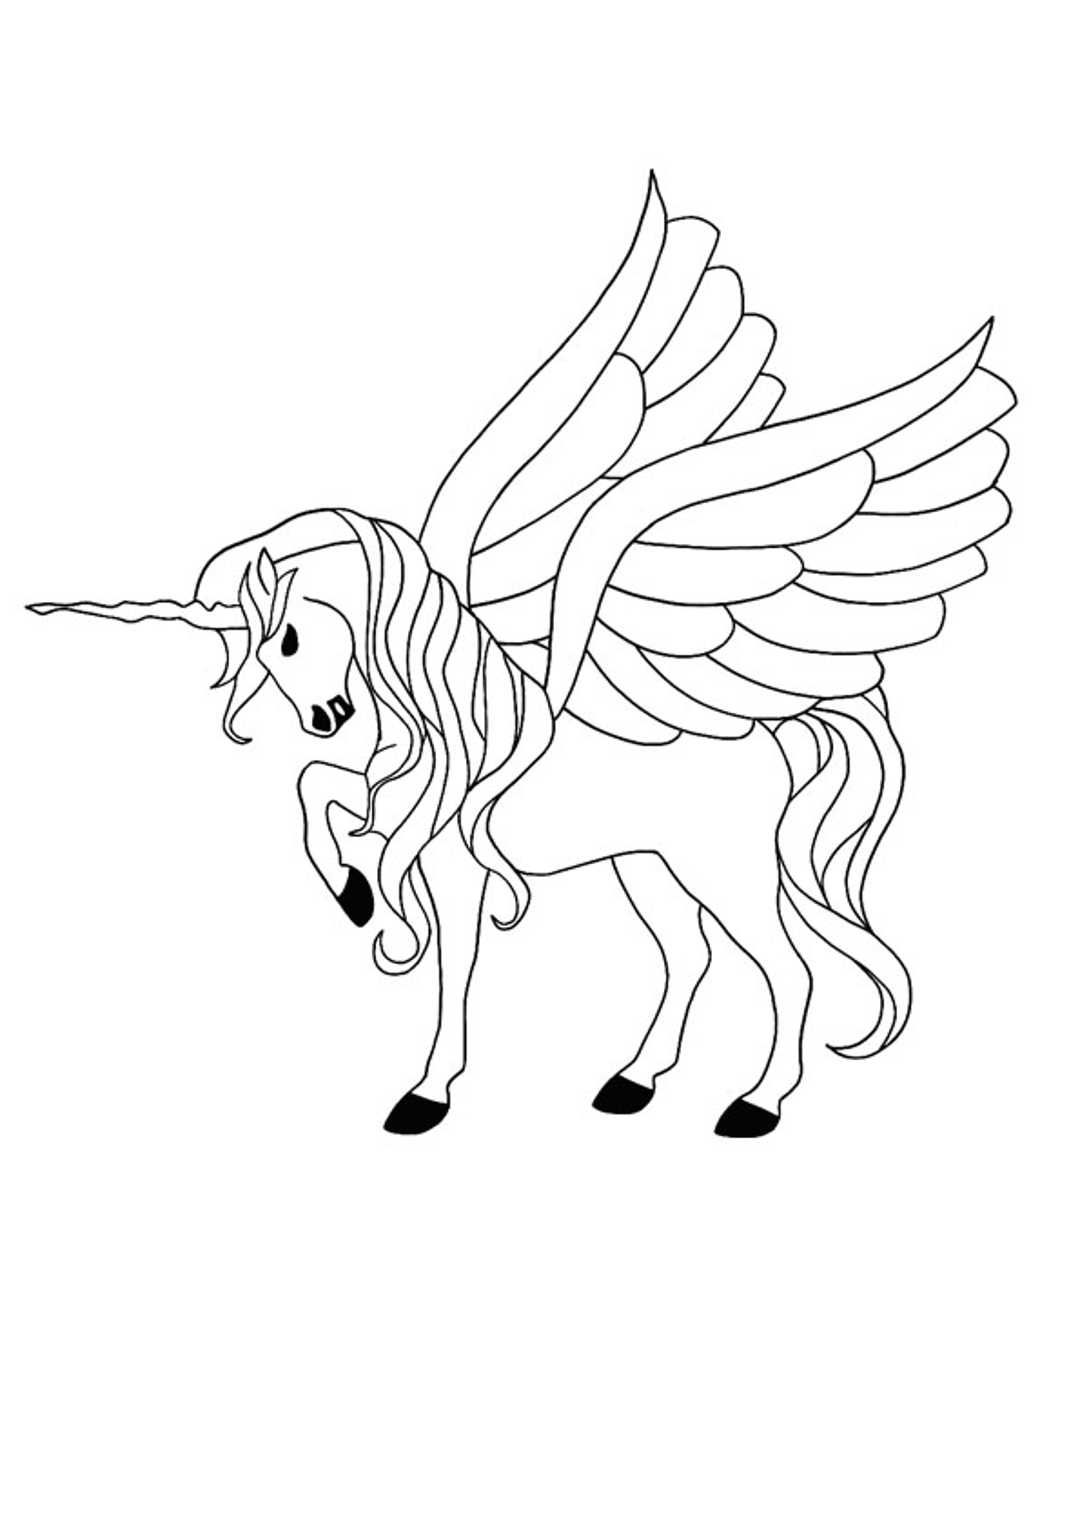 Winged unicorn coloring page | Unicorn coloring pages, Star coloring pages,  Mermaid coloring pages